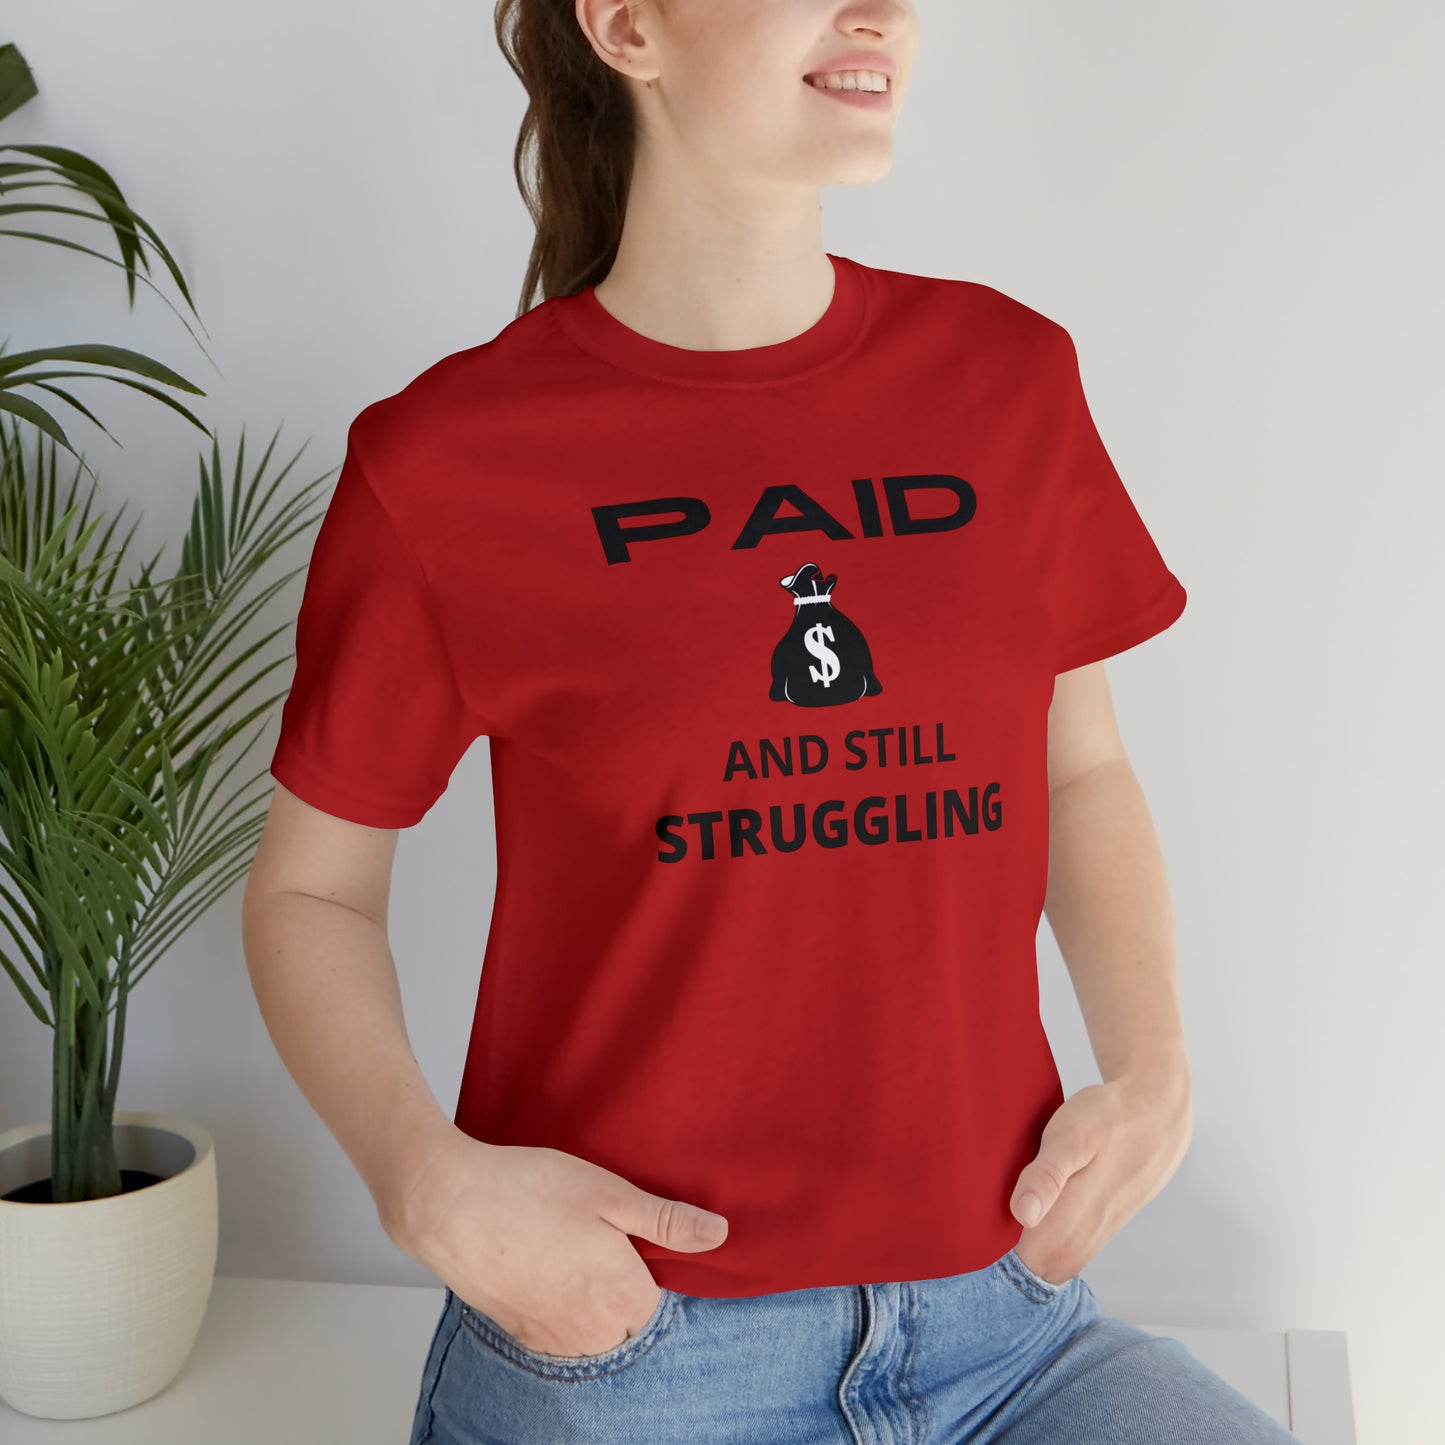 Paid and Still Struggling Tee